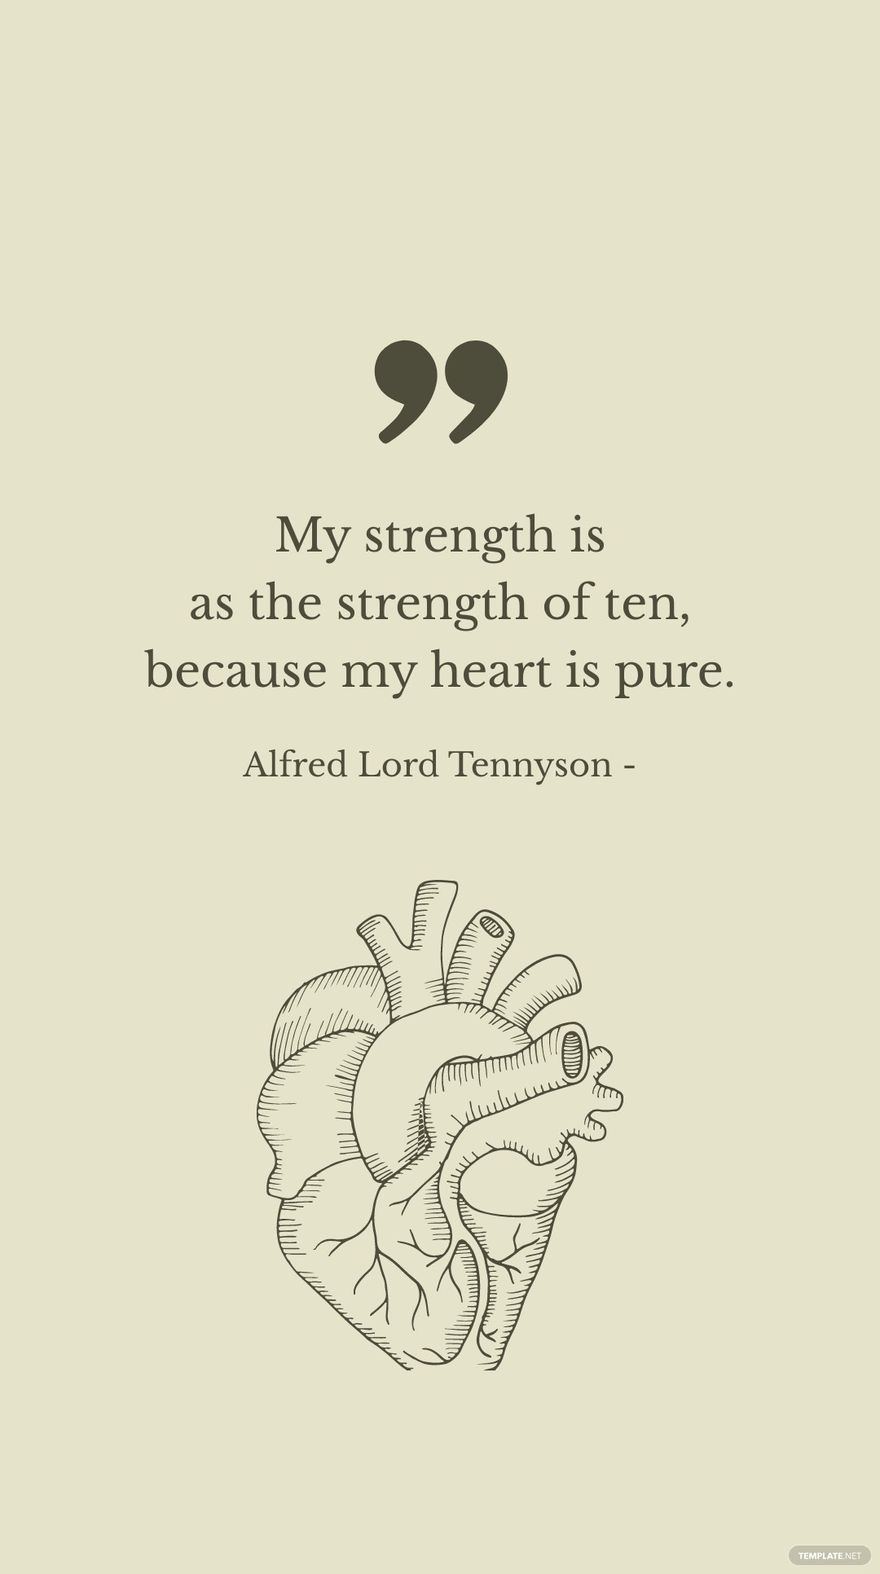 Alfred Lord Tennyson - My strength is as the strength of ten, because my heart is pure.